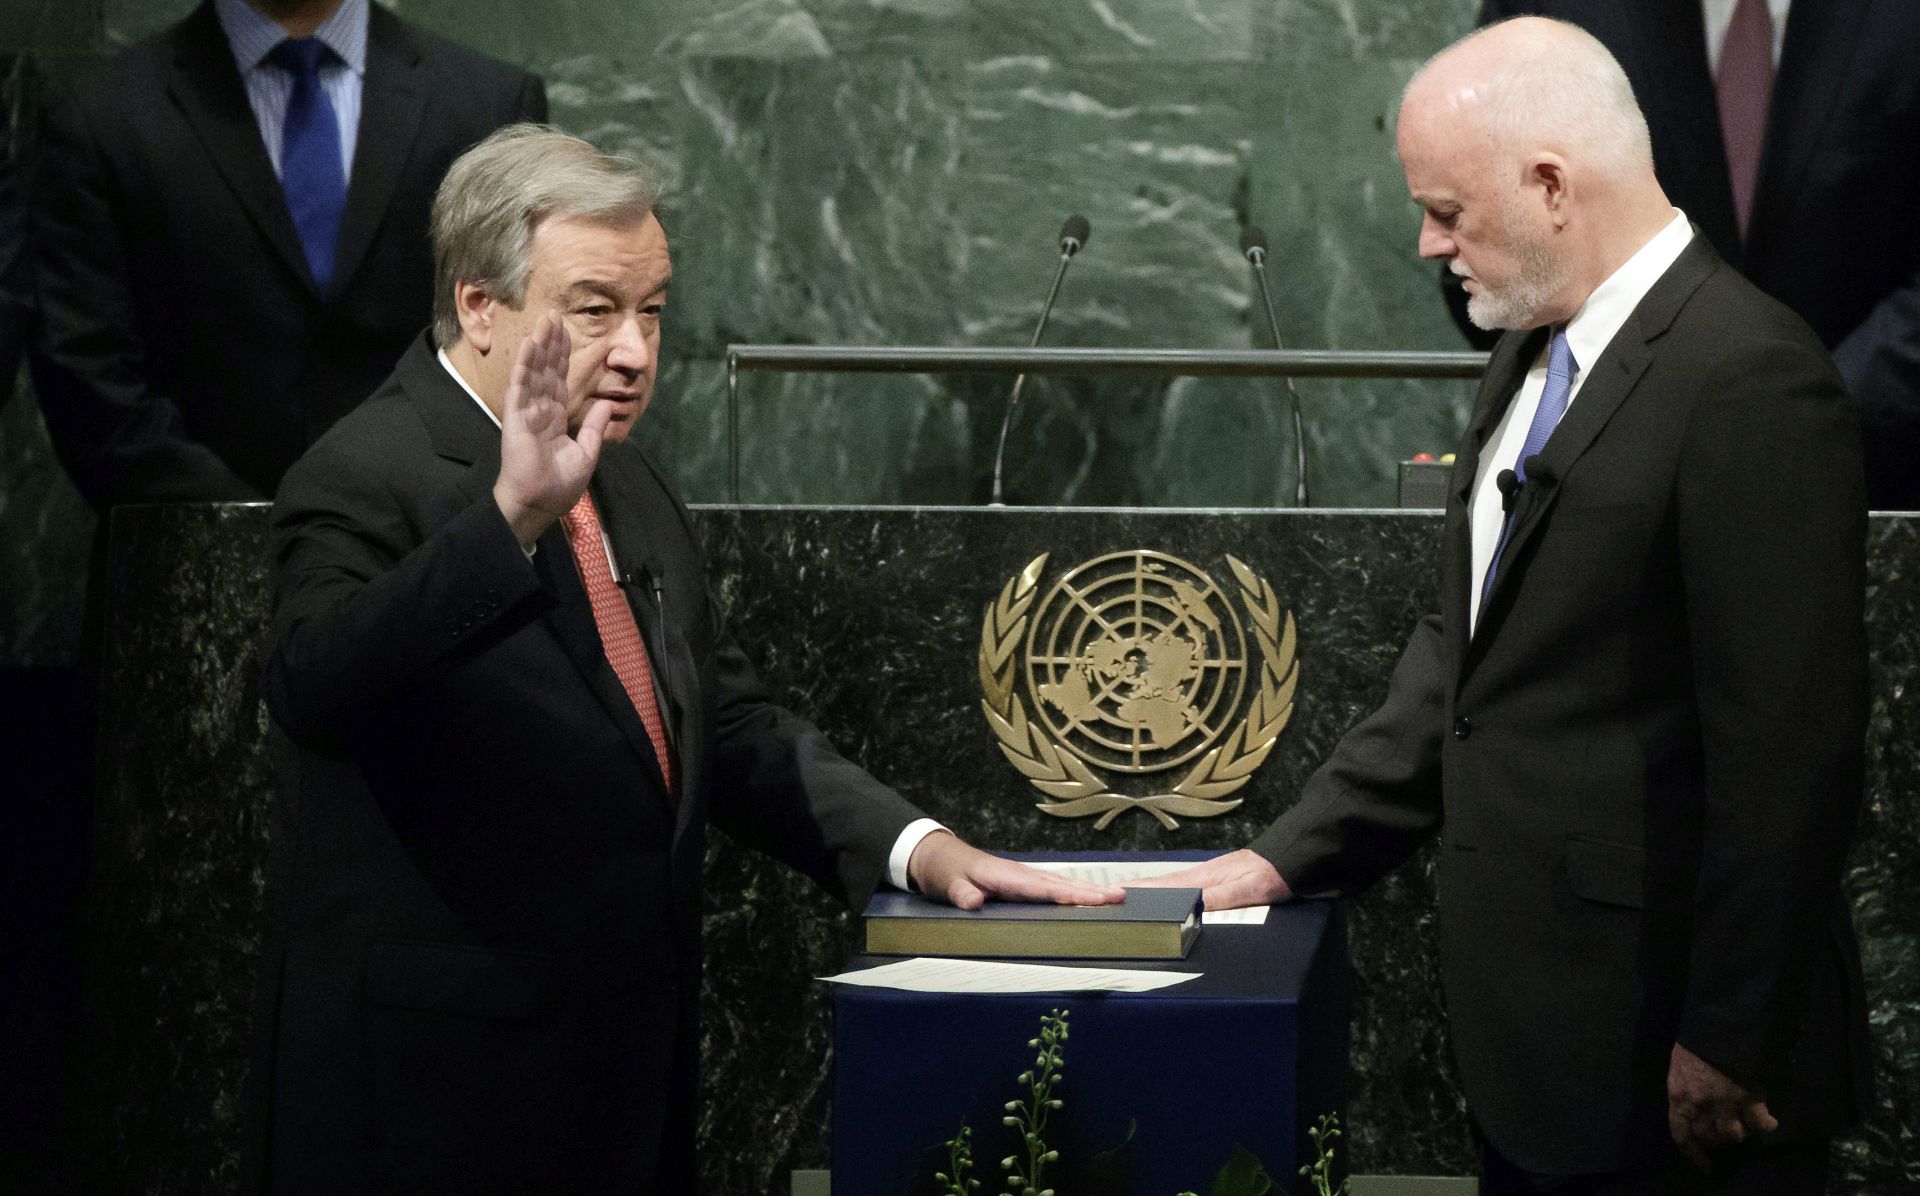 epa05672816 Secretary-General designate Antonio Guterres (L) is sworn in as the new Secretary-General of the United Nations by Peter Thomson (R), President of the 71st session of the General Assembly, during a ceremony in the General Assembly hall at United Nations headquarters in New York, New York, USA, 12 December 2016. Guterres will officially take over the position from Ban Ki-moon on 01 January 2017.  EPA/JUSTIN LANE